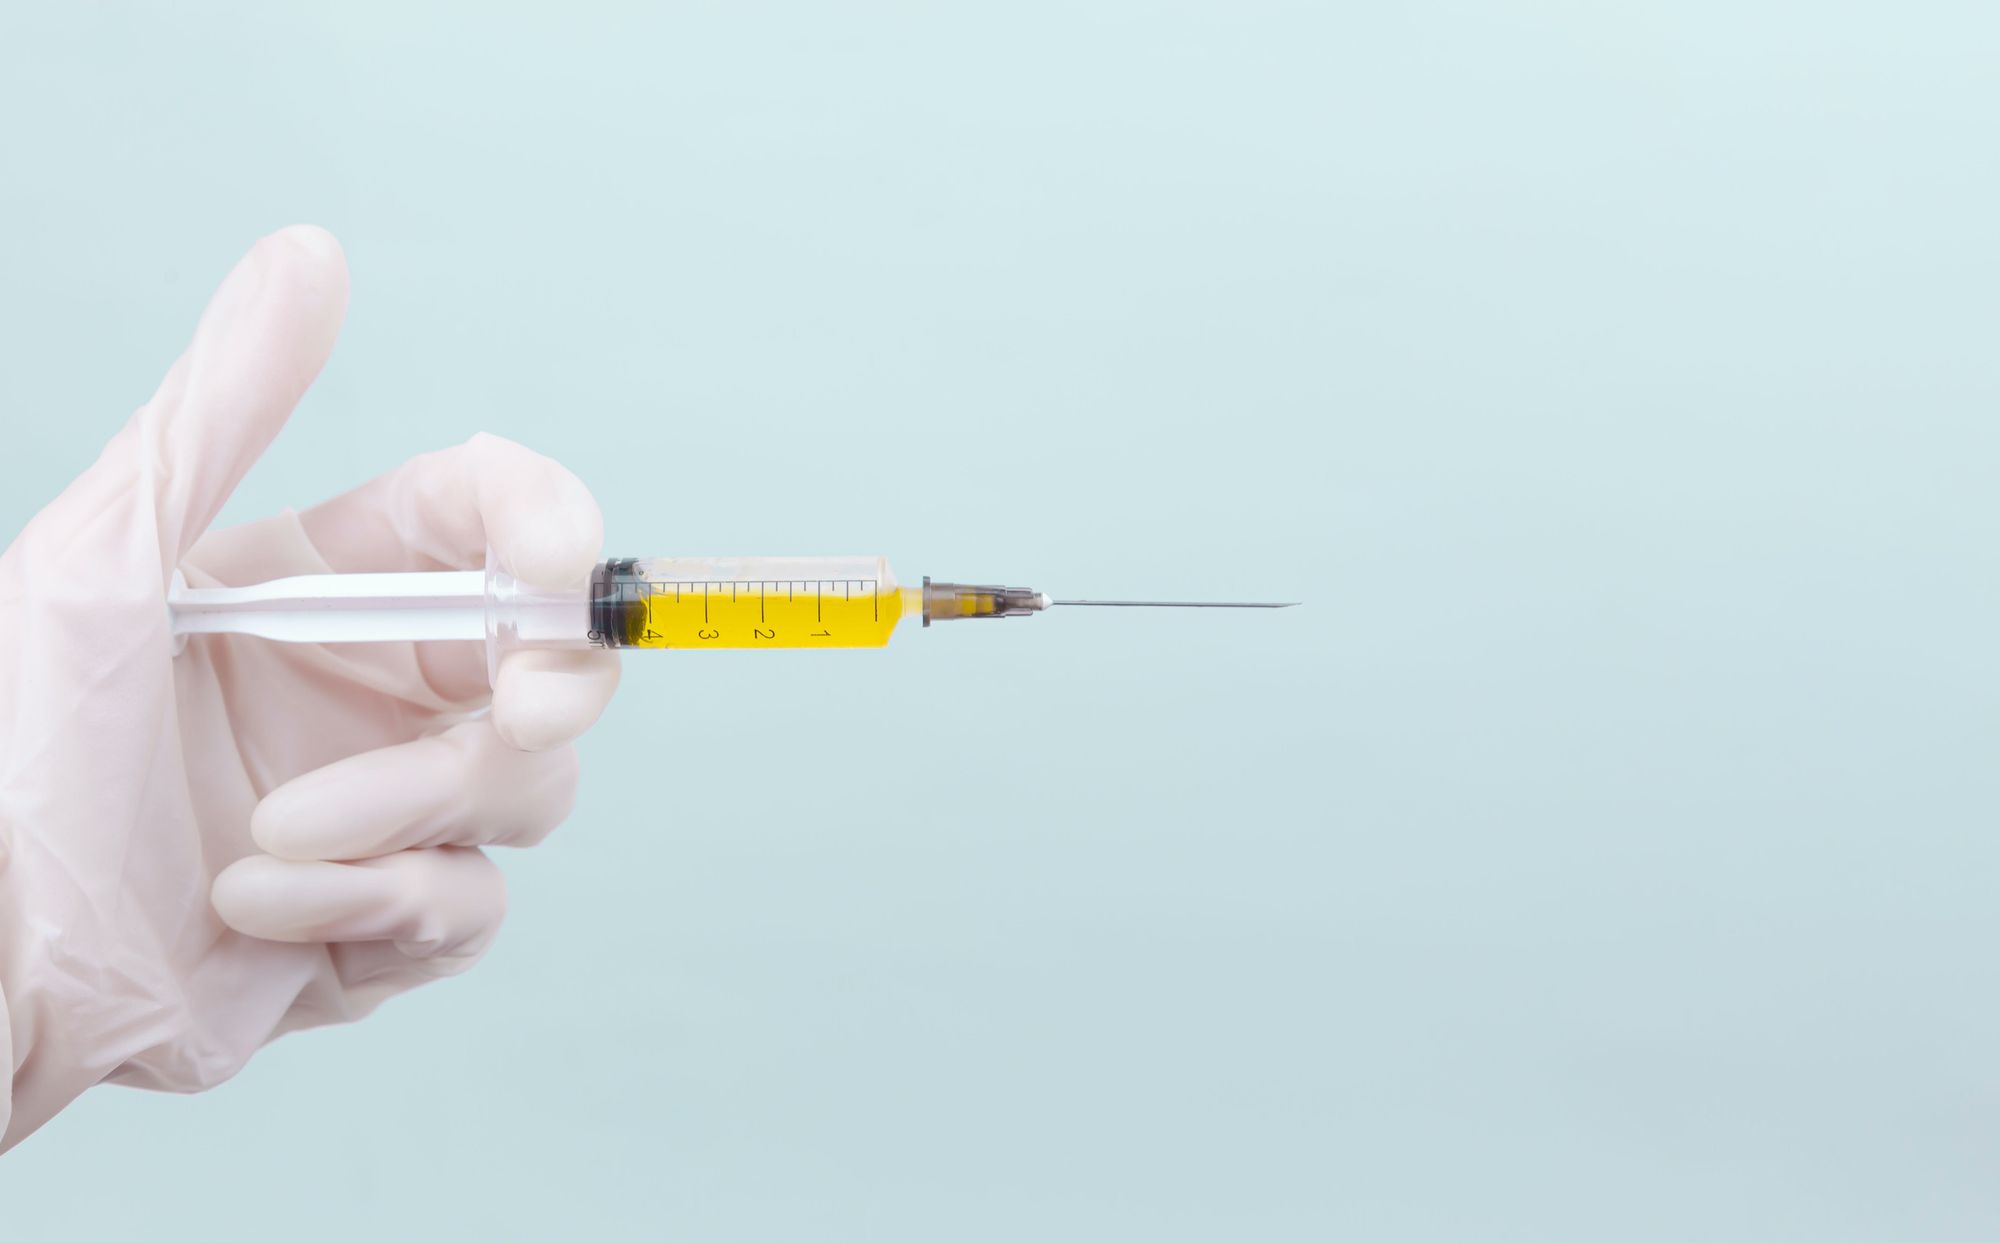 How Can We Increase Vaccination Rates When People Just Say “No”?